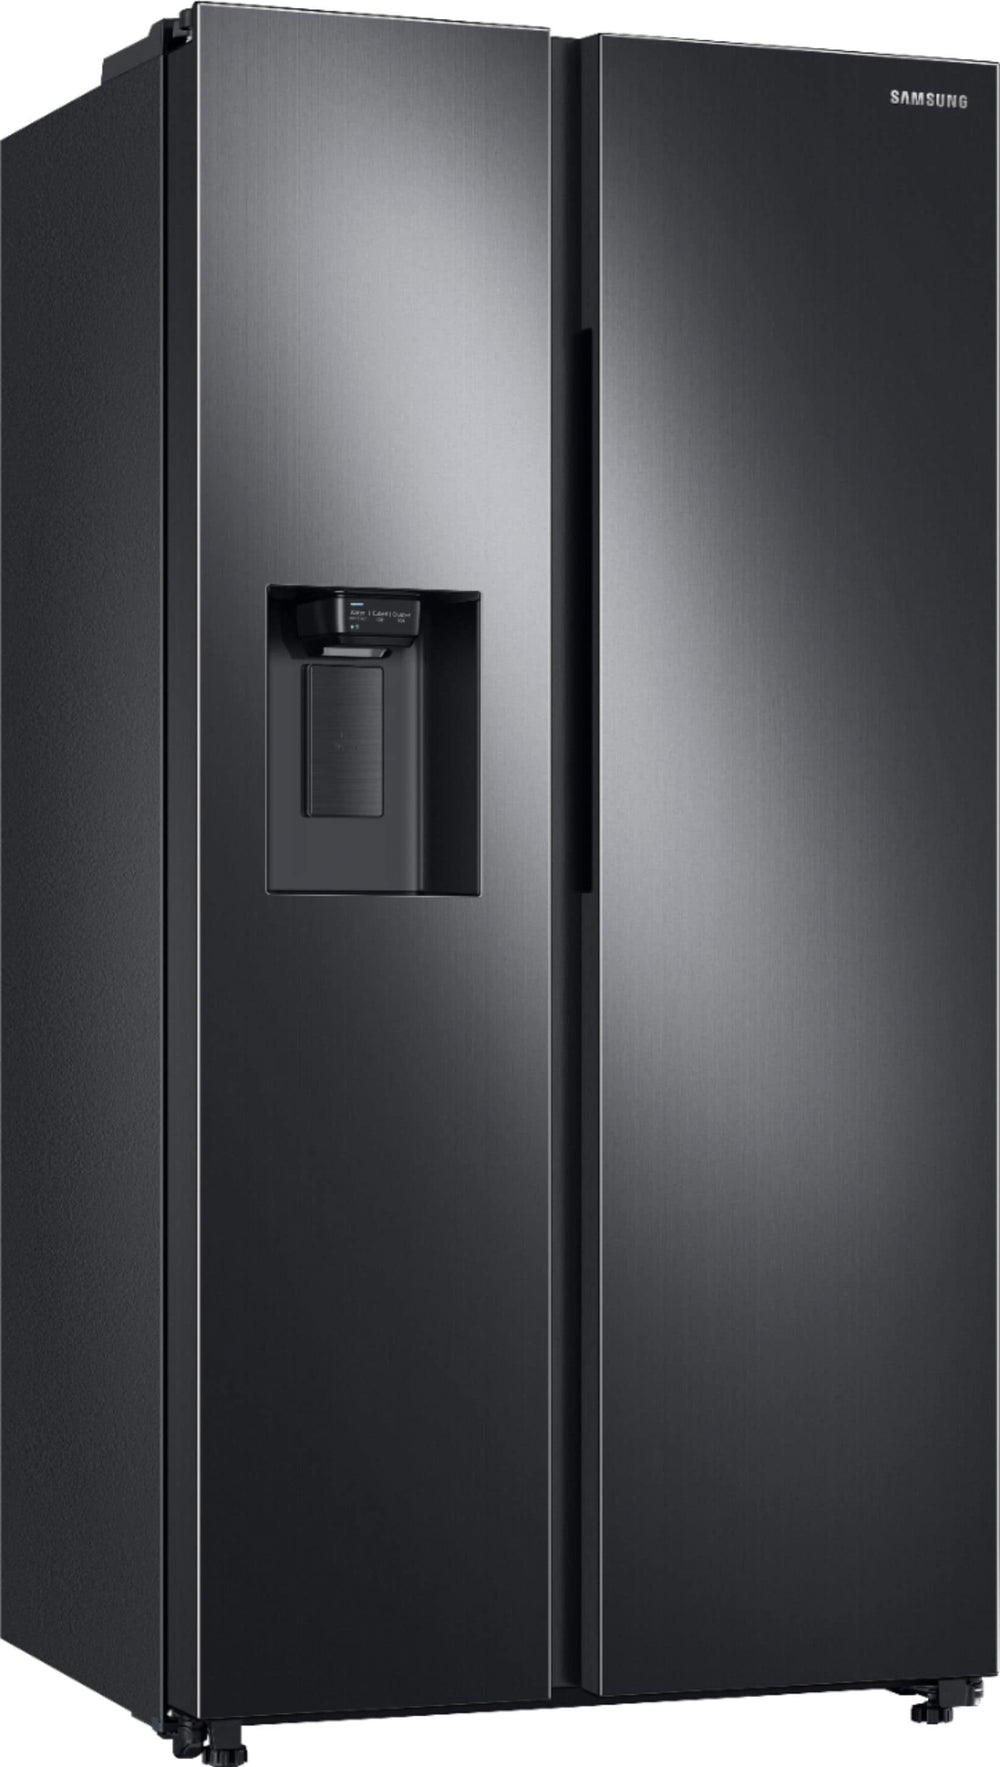 Samsung - 22 Cu. Ft. Side-by-Side Counter-Depth Refrigerator - Black stainless steel_1